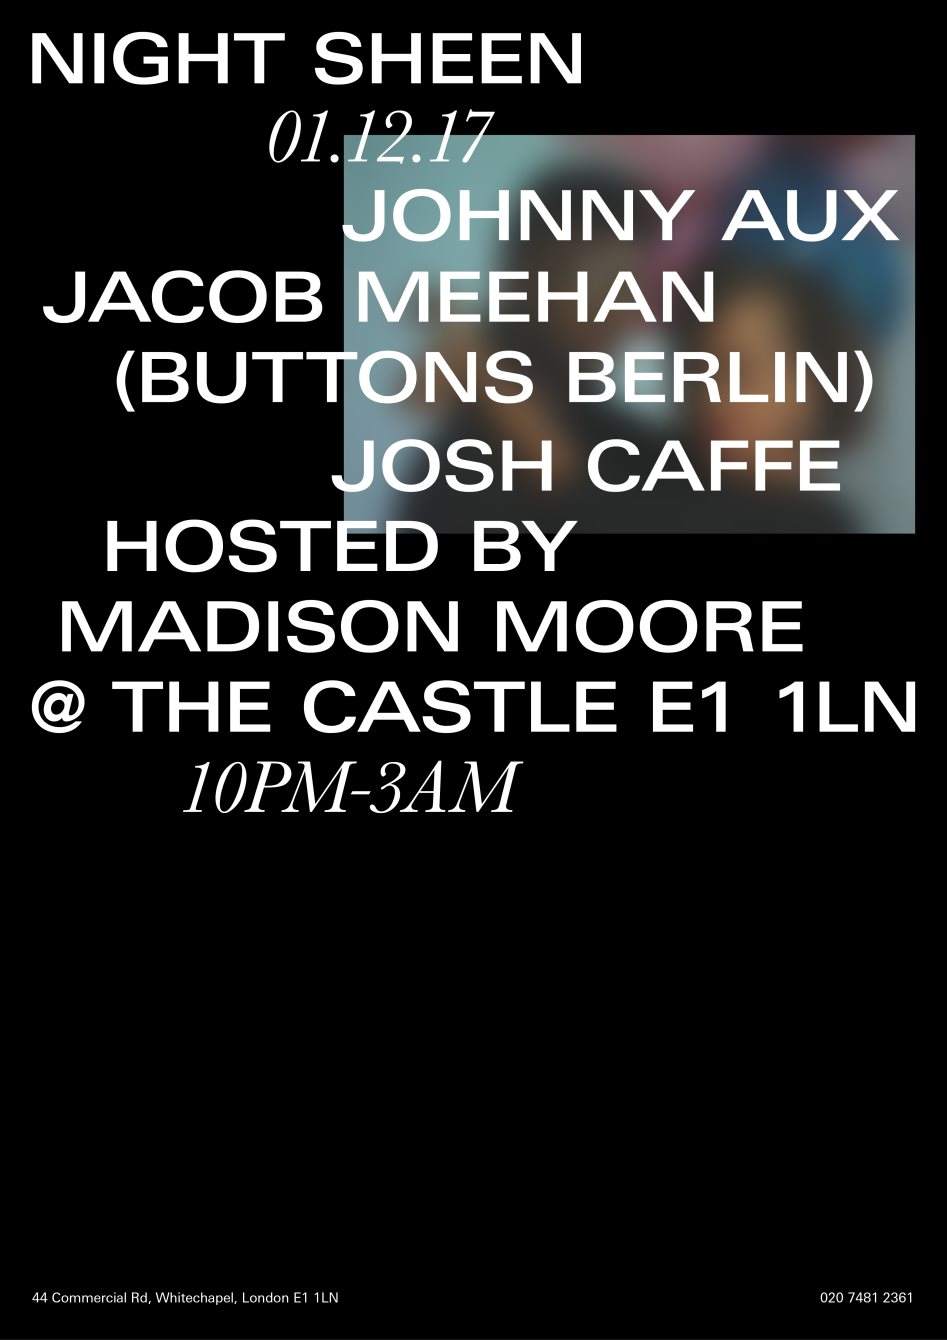 Night Sheen with Johnny Aux, Jacob Meehan & Josh Caffe - Flyer front